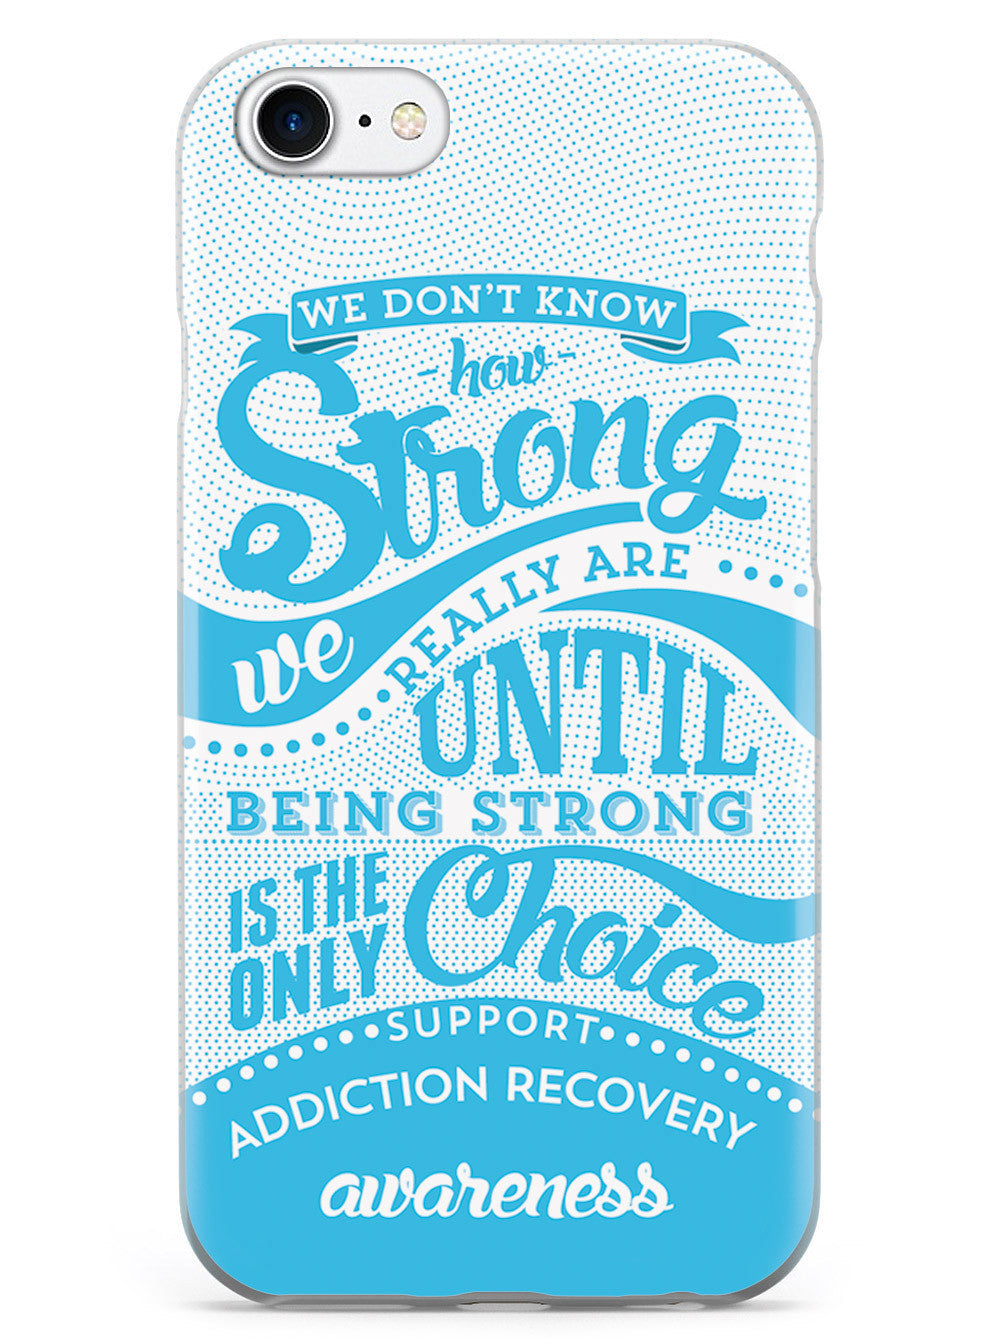 Addiction Recovery - How Strong Case